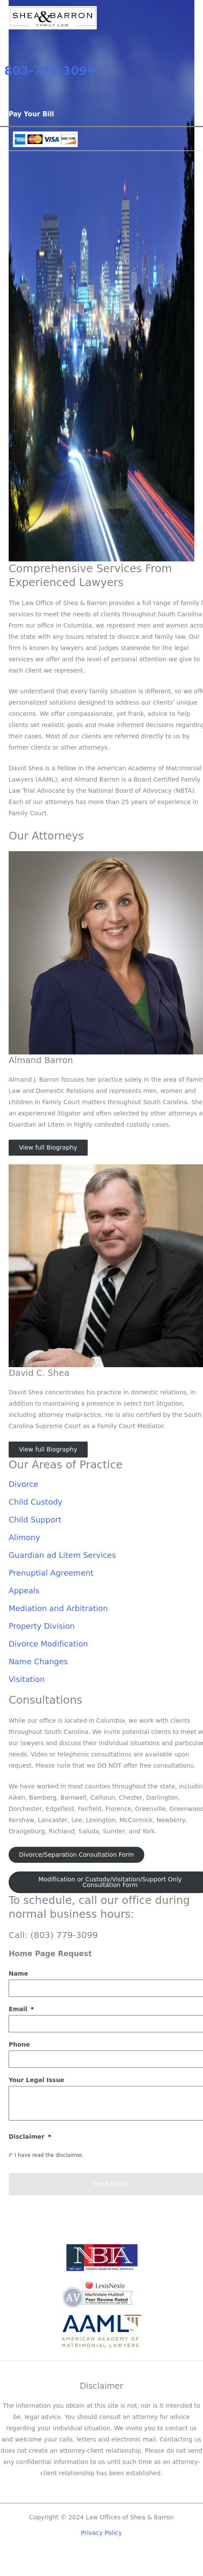 The Law Offices of Shea & Barron - Columbia SC Lawyers